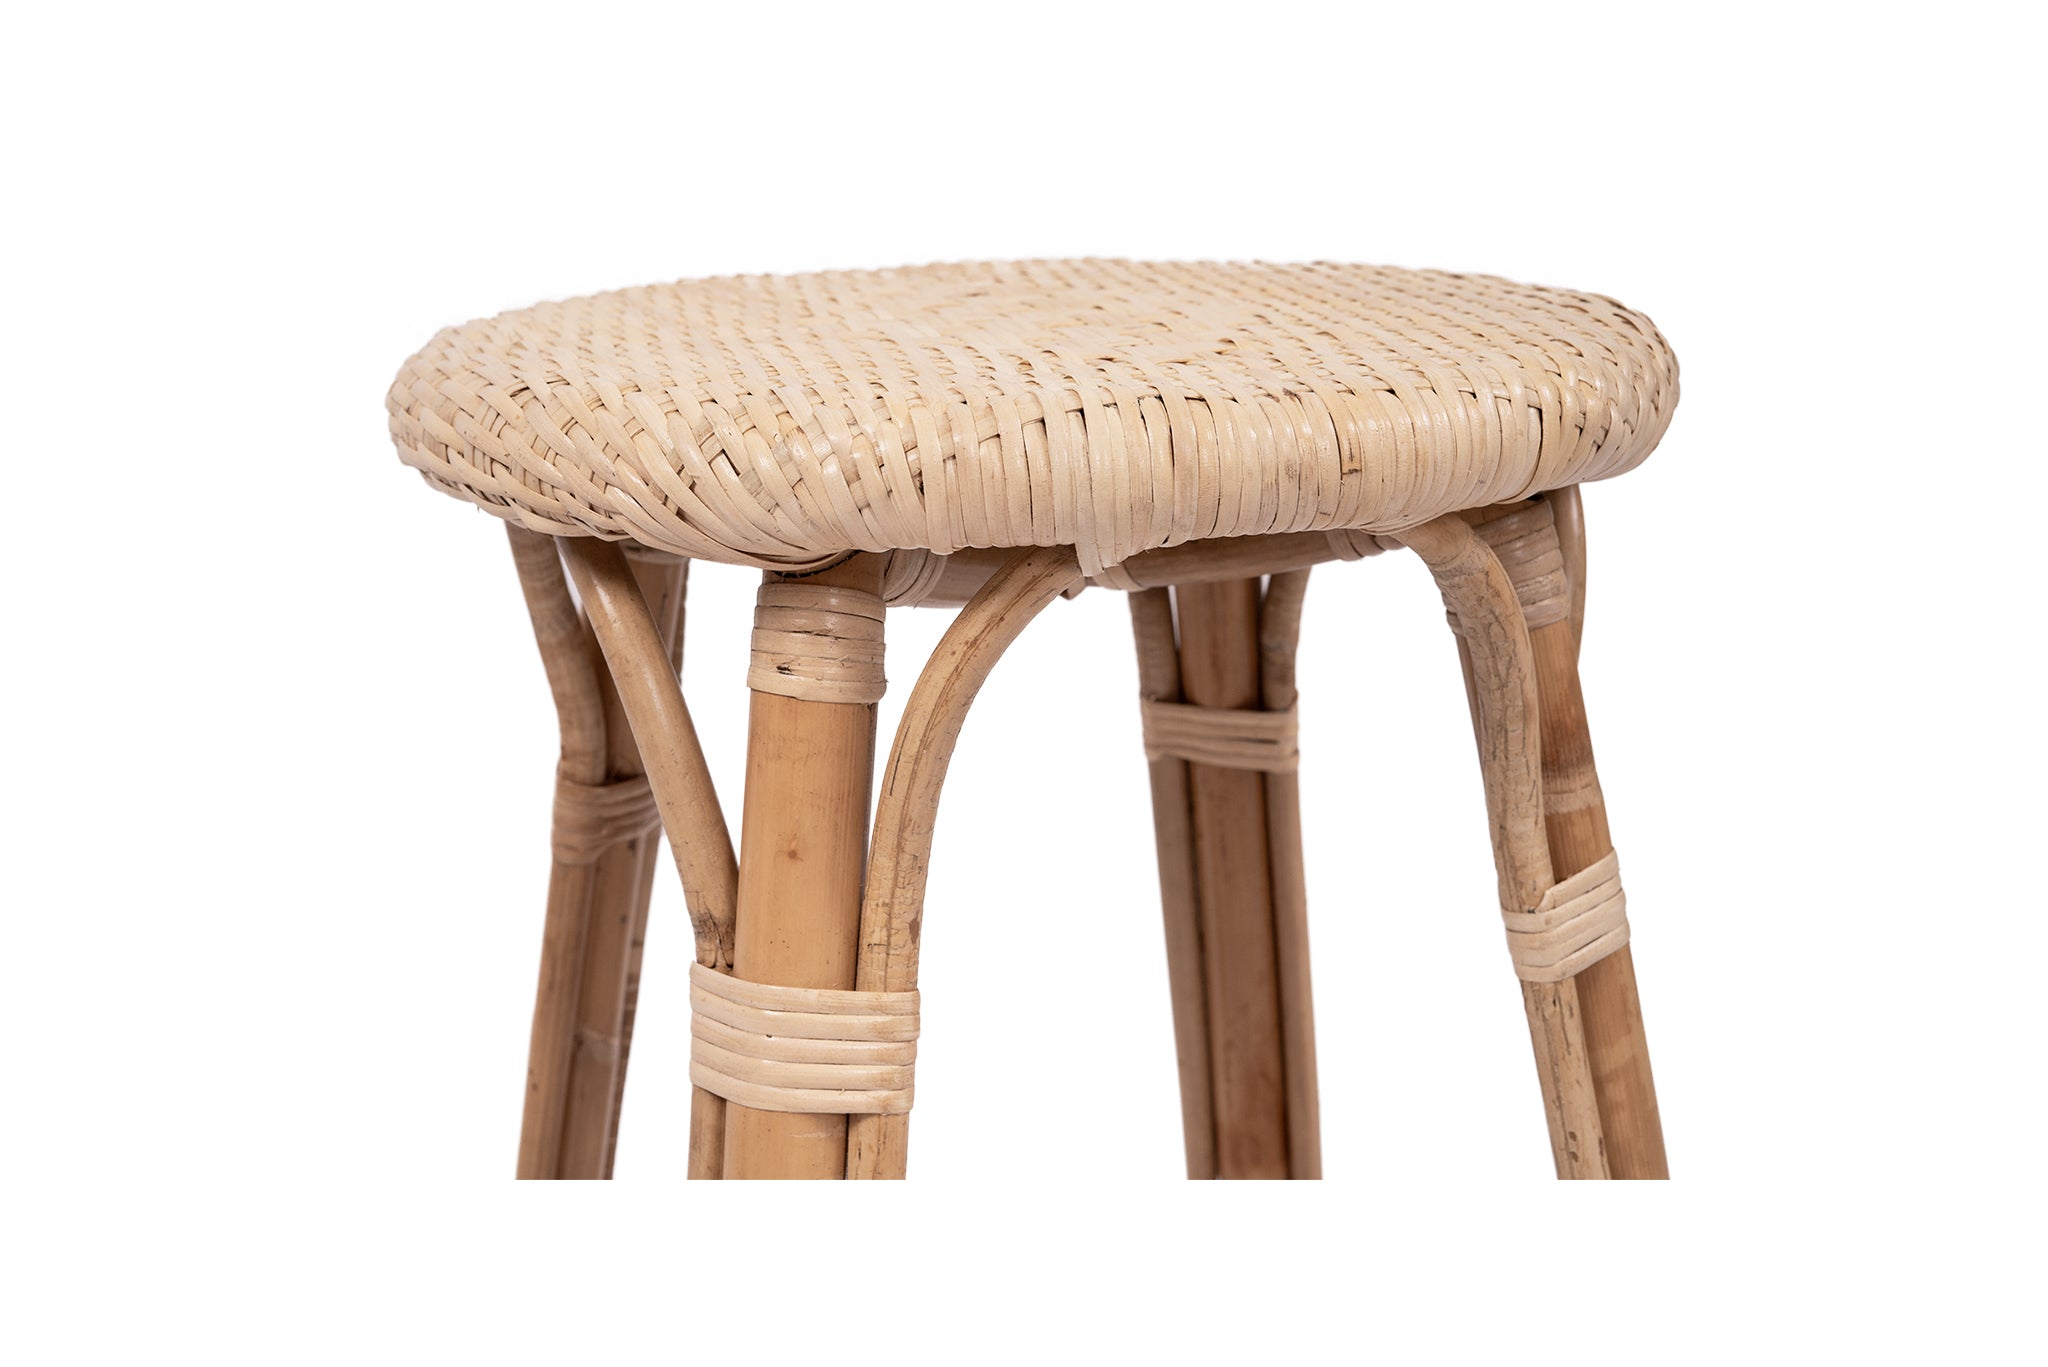 Williamstown Rattan Backless Counter Stool – Natural